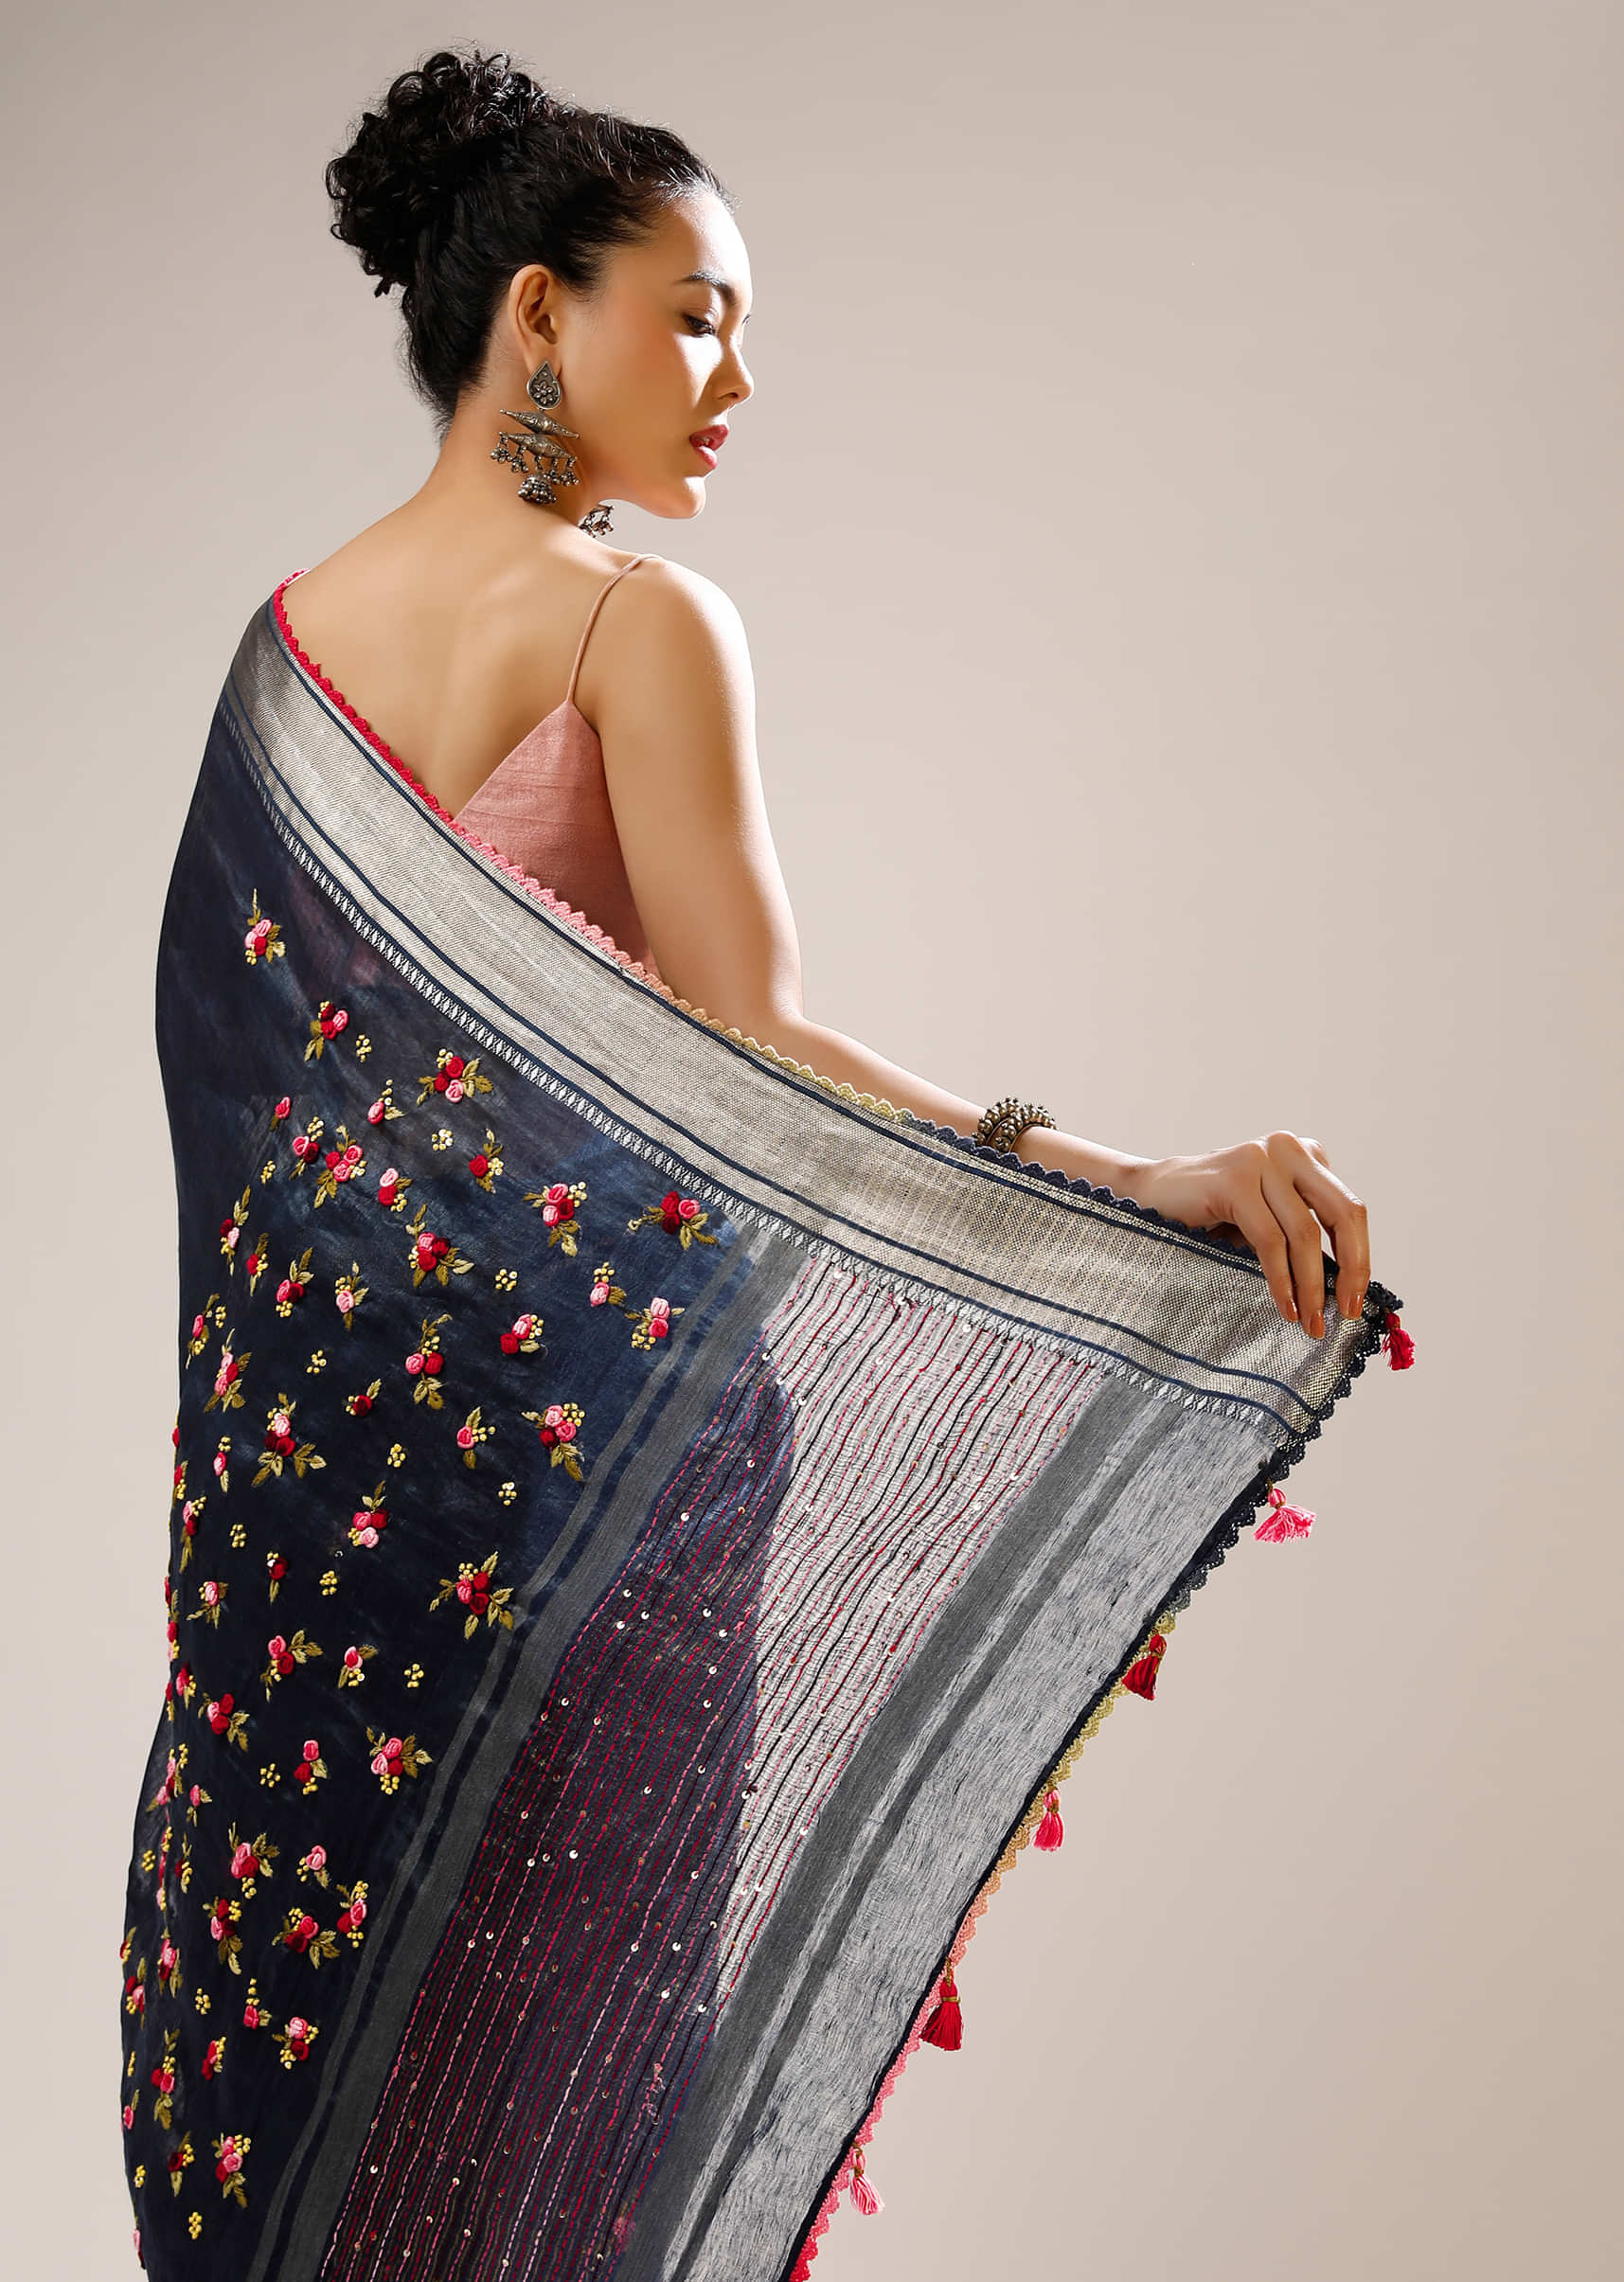 Insignia Blue Saree In Tussar Silk With Multicolored Bud Hand Embroidered Roses And Running Stich Design  